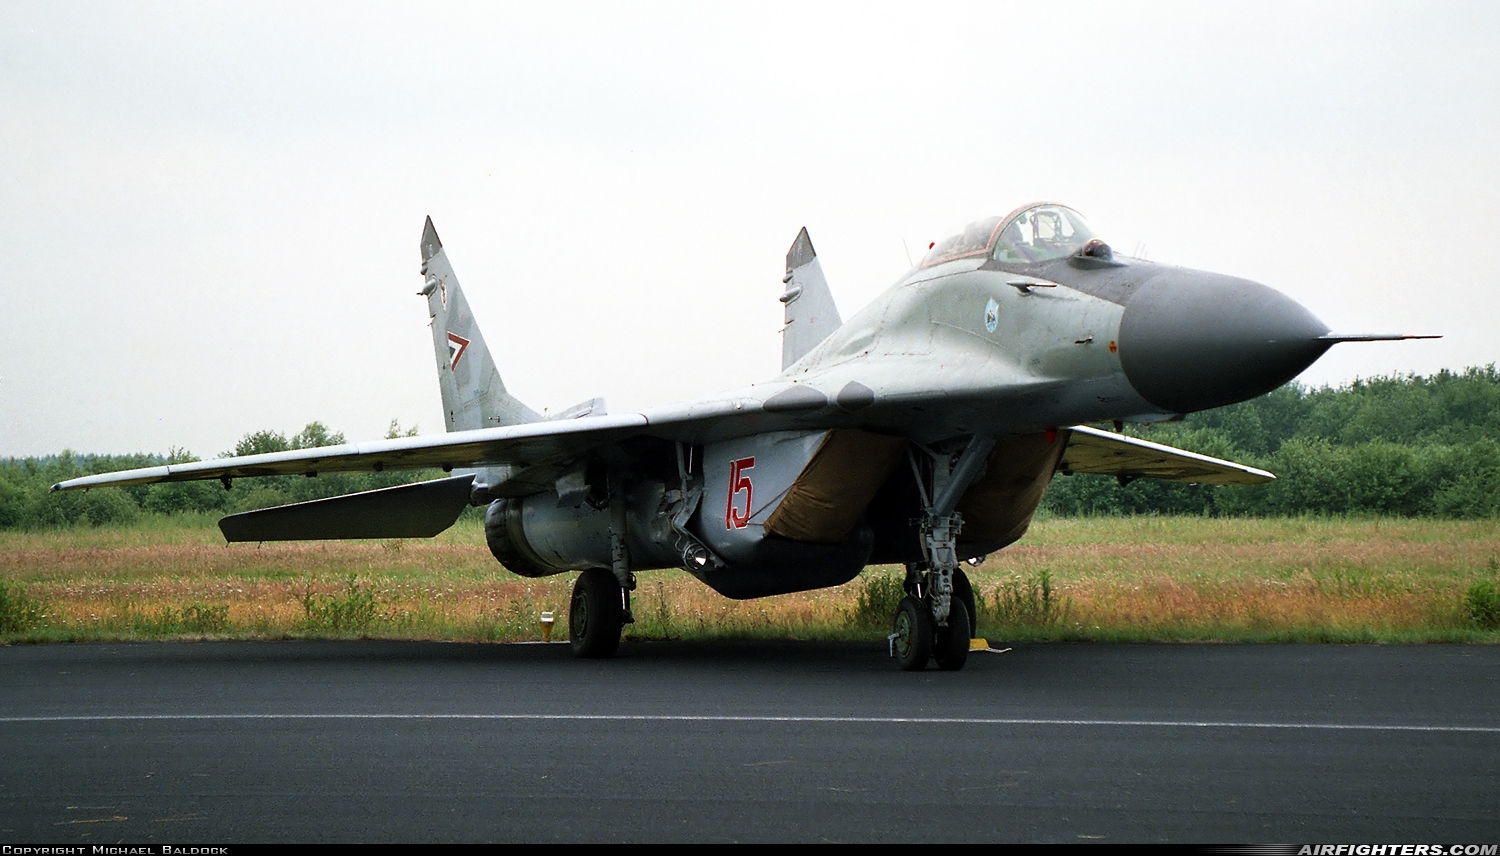 Hungary - Air Force Mikoyan-Gurevich MiG-29B (9.12A) 15 at Enschede - Twenthe (ENS / EHTW), Netherlands